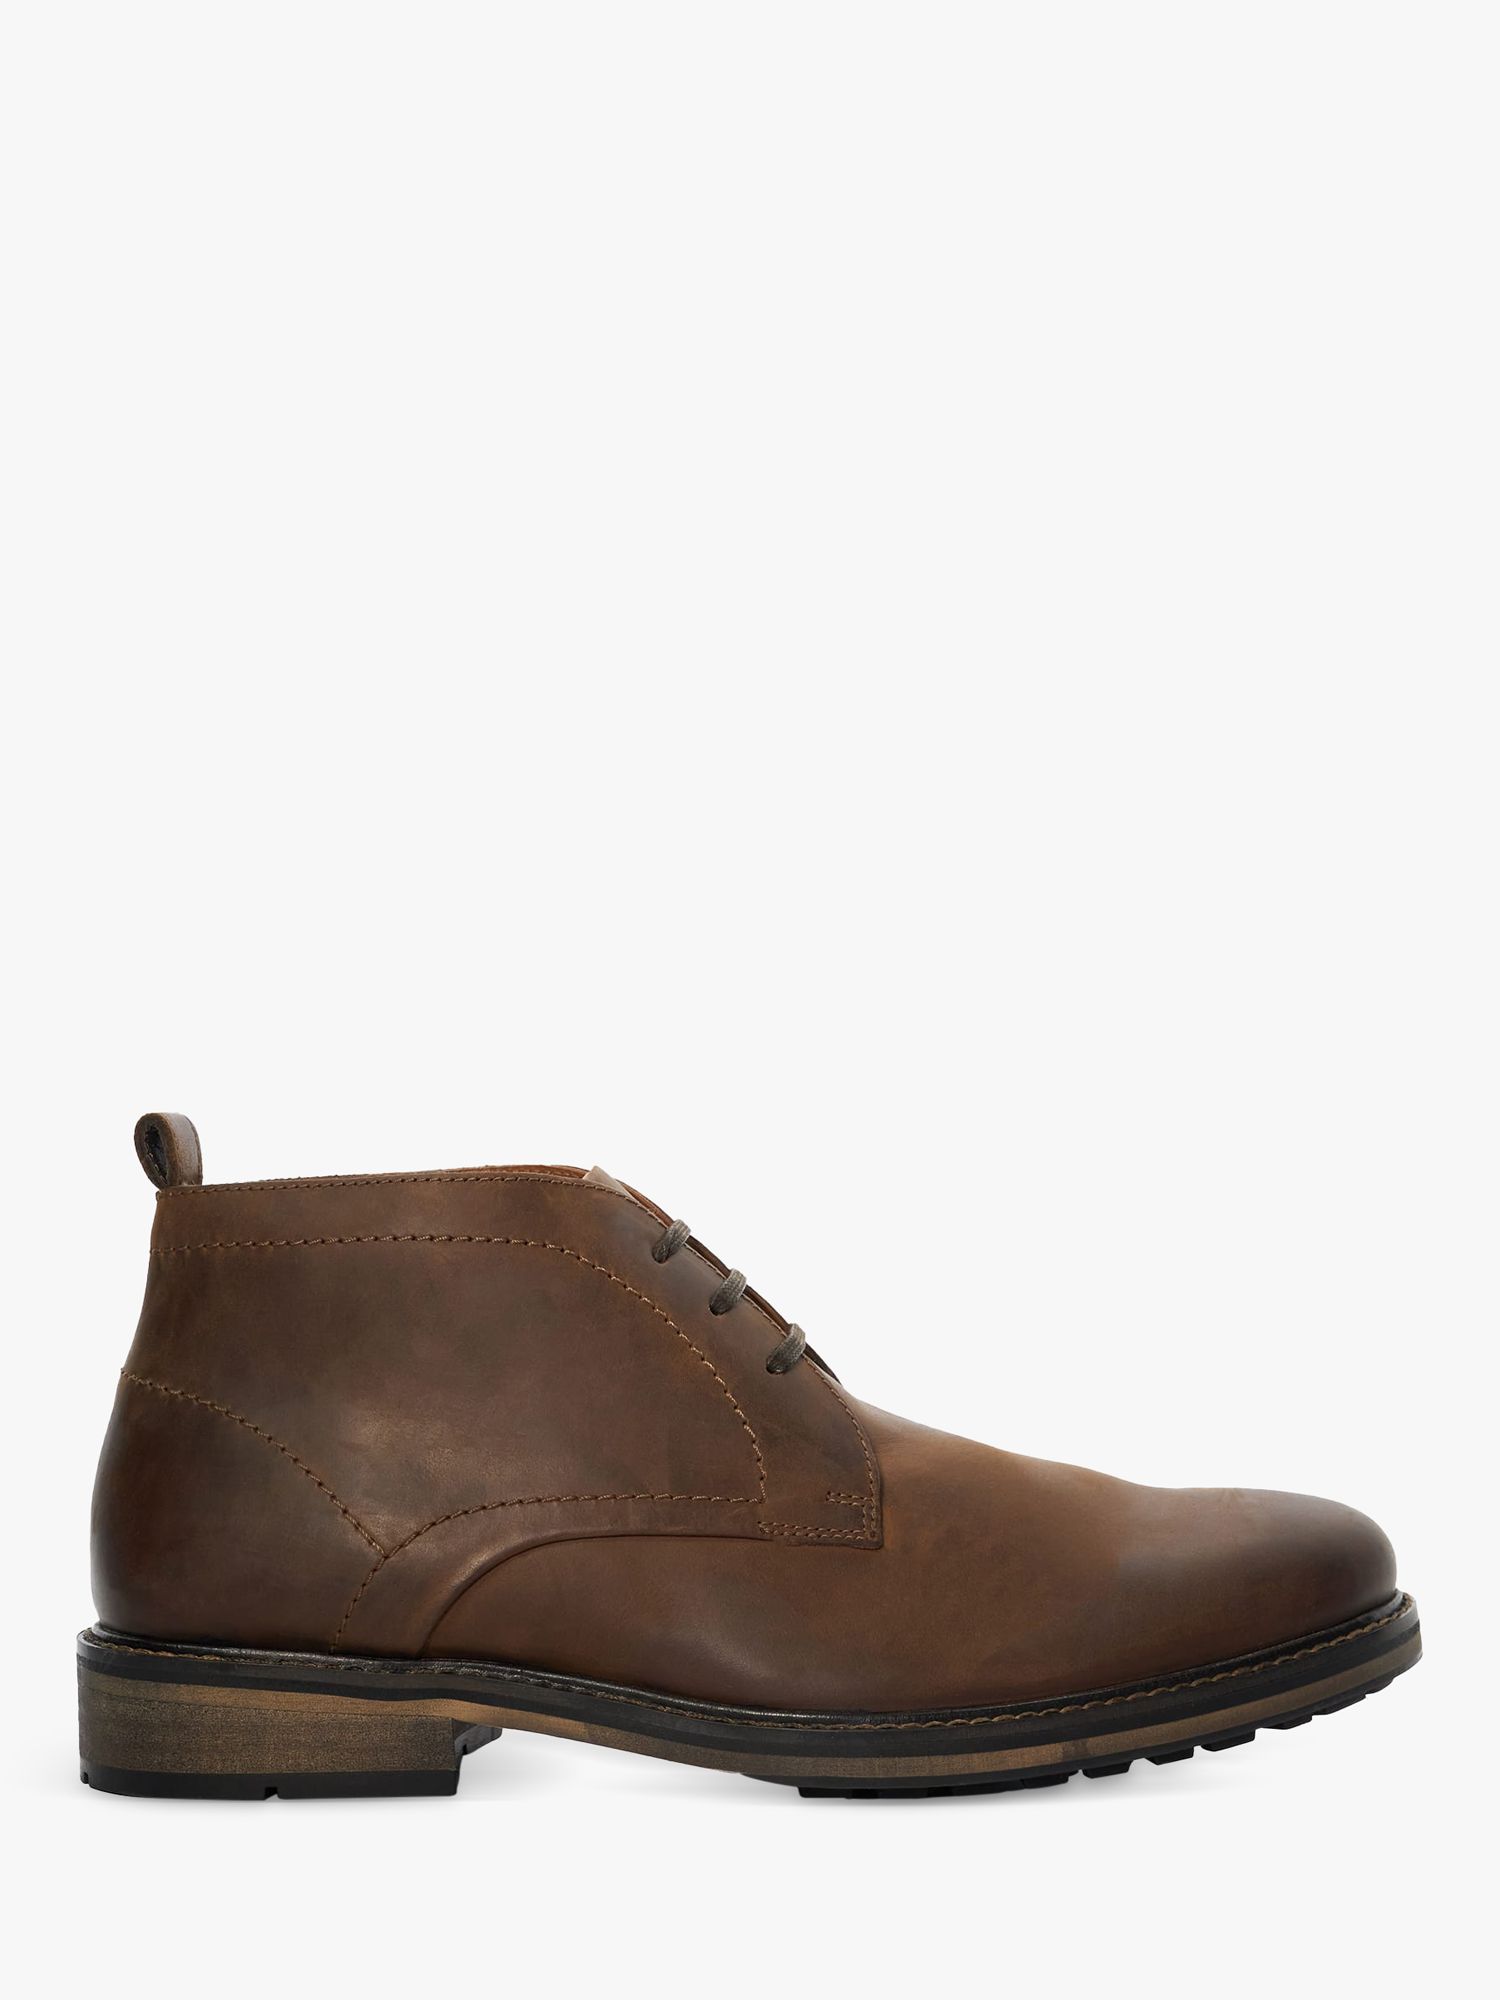 Dune Charleys Leather Chukka Boots, Brown at John Lewis & Partners